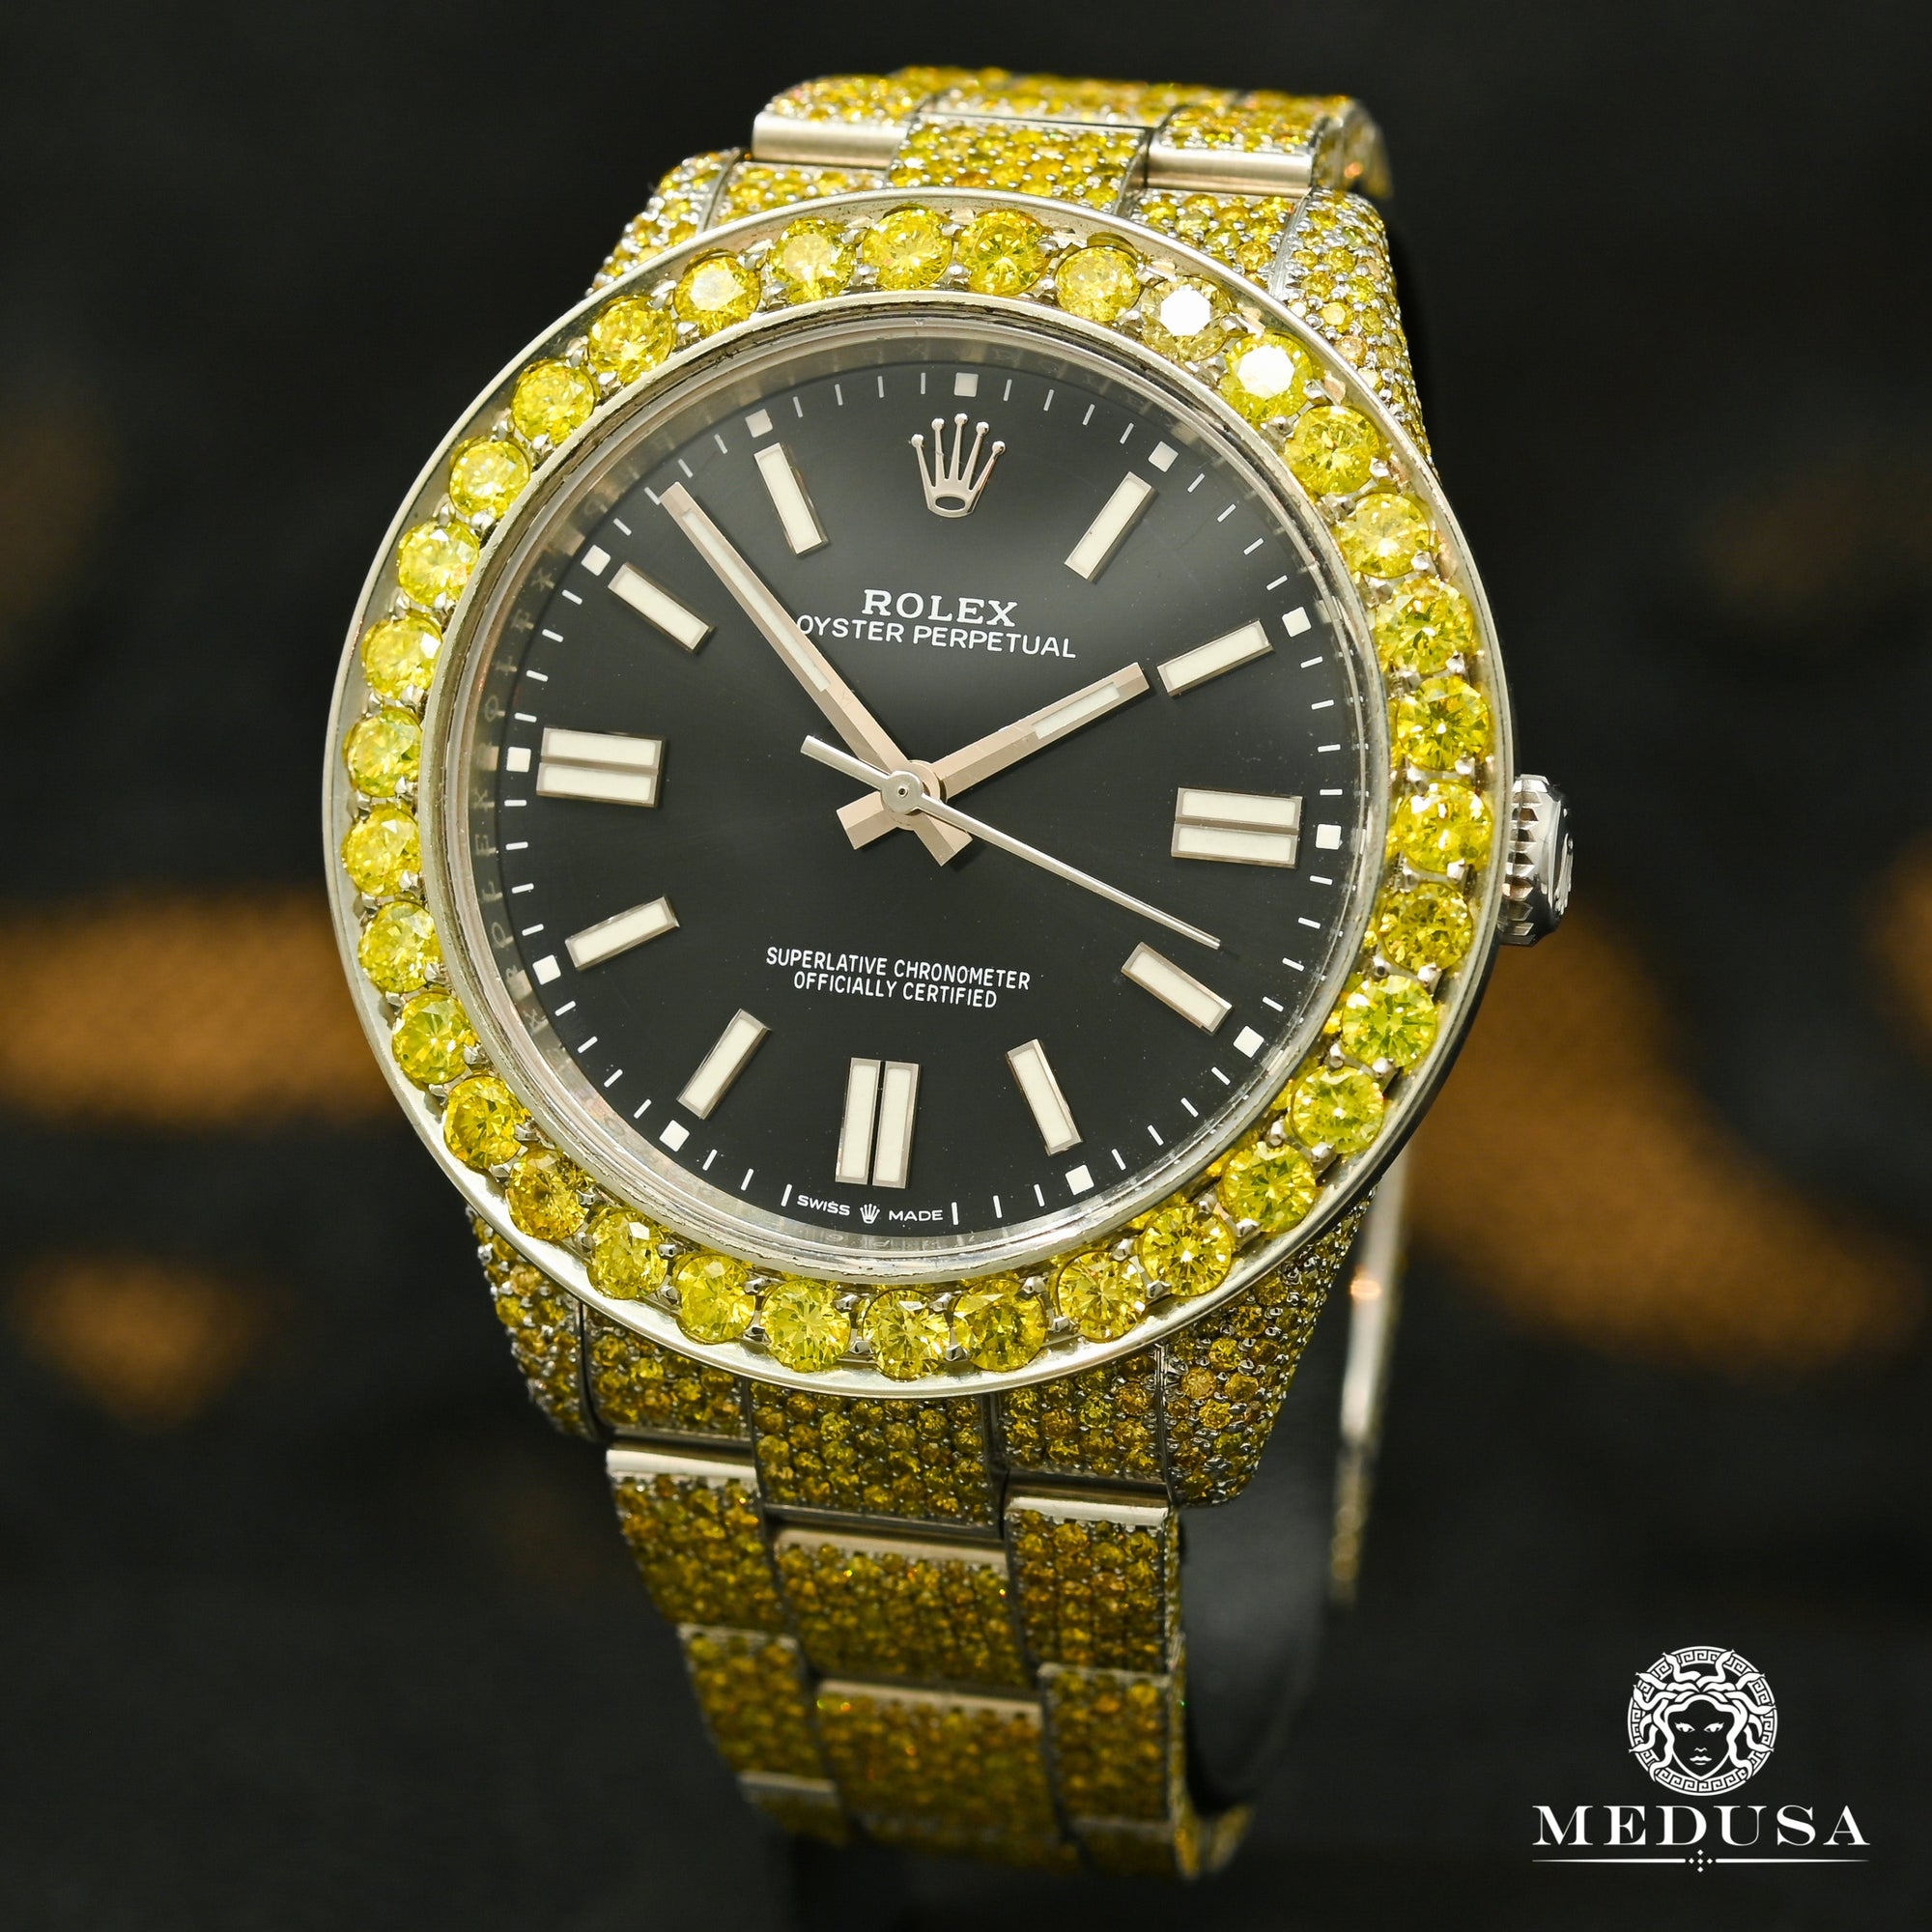 Rolex watch | Rolex Oyster Perpetual 41mm Men's Watch - Yellow Diamond Stainless